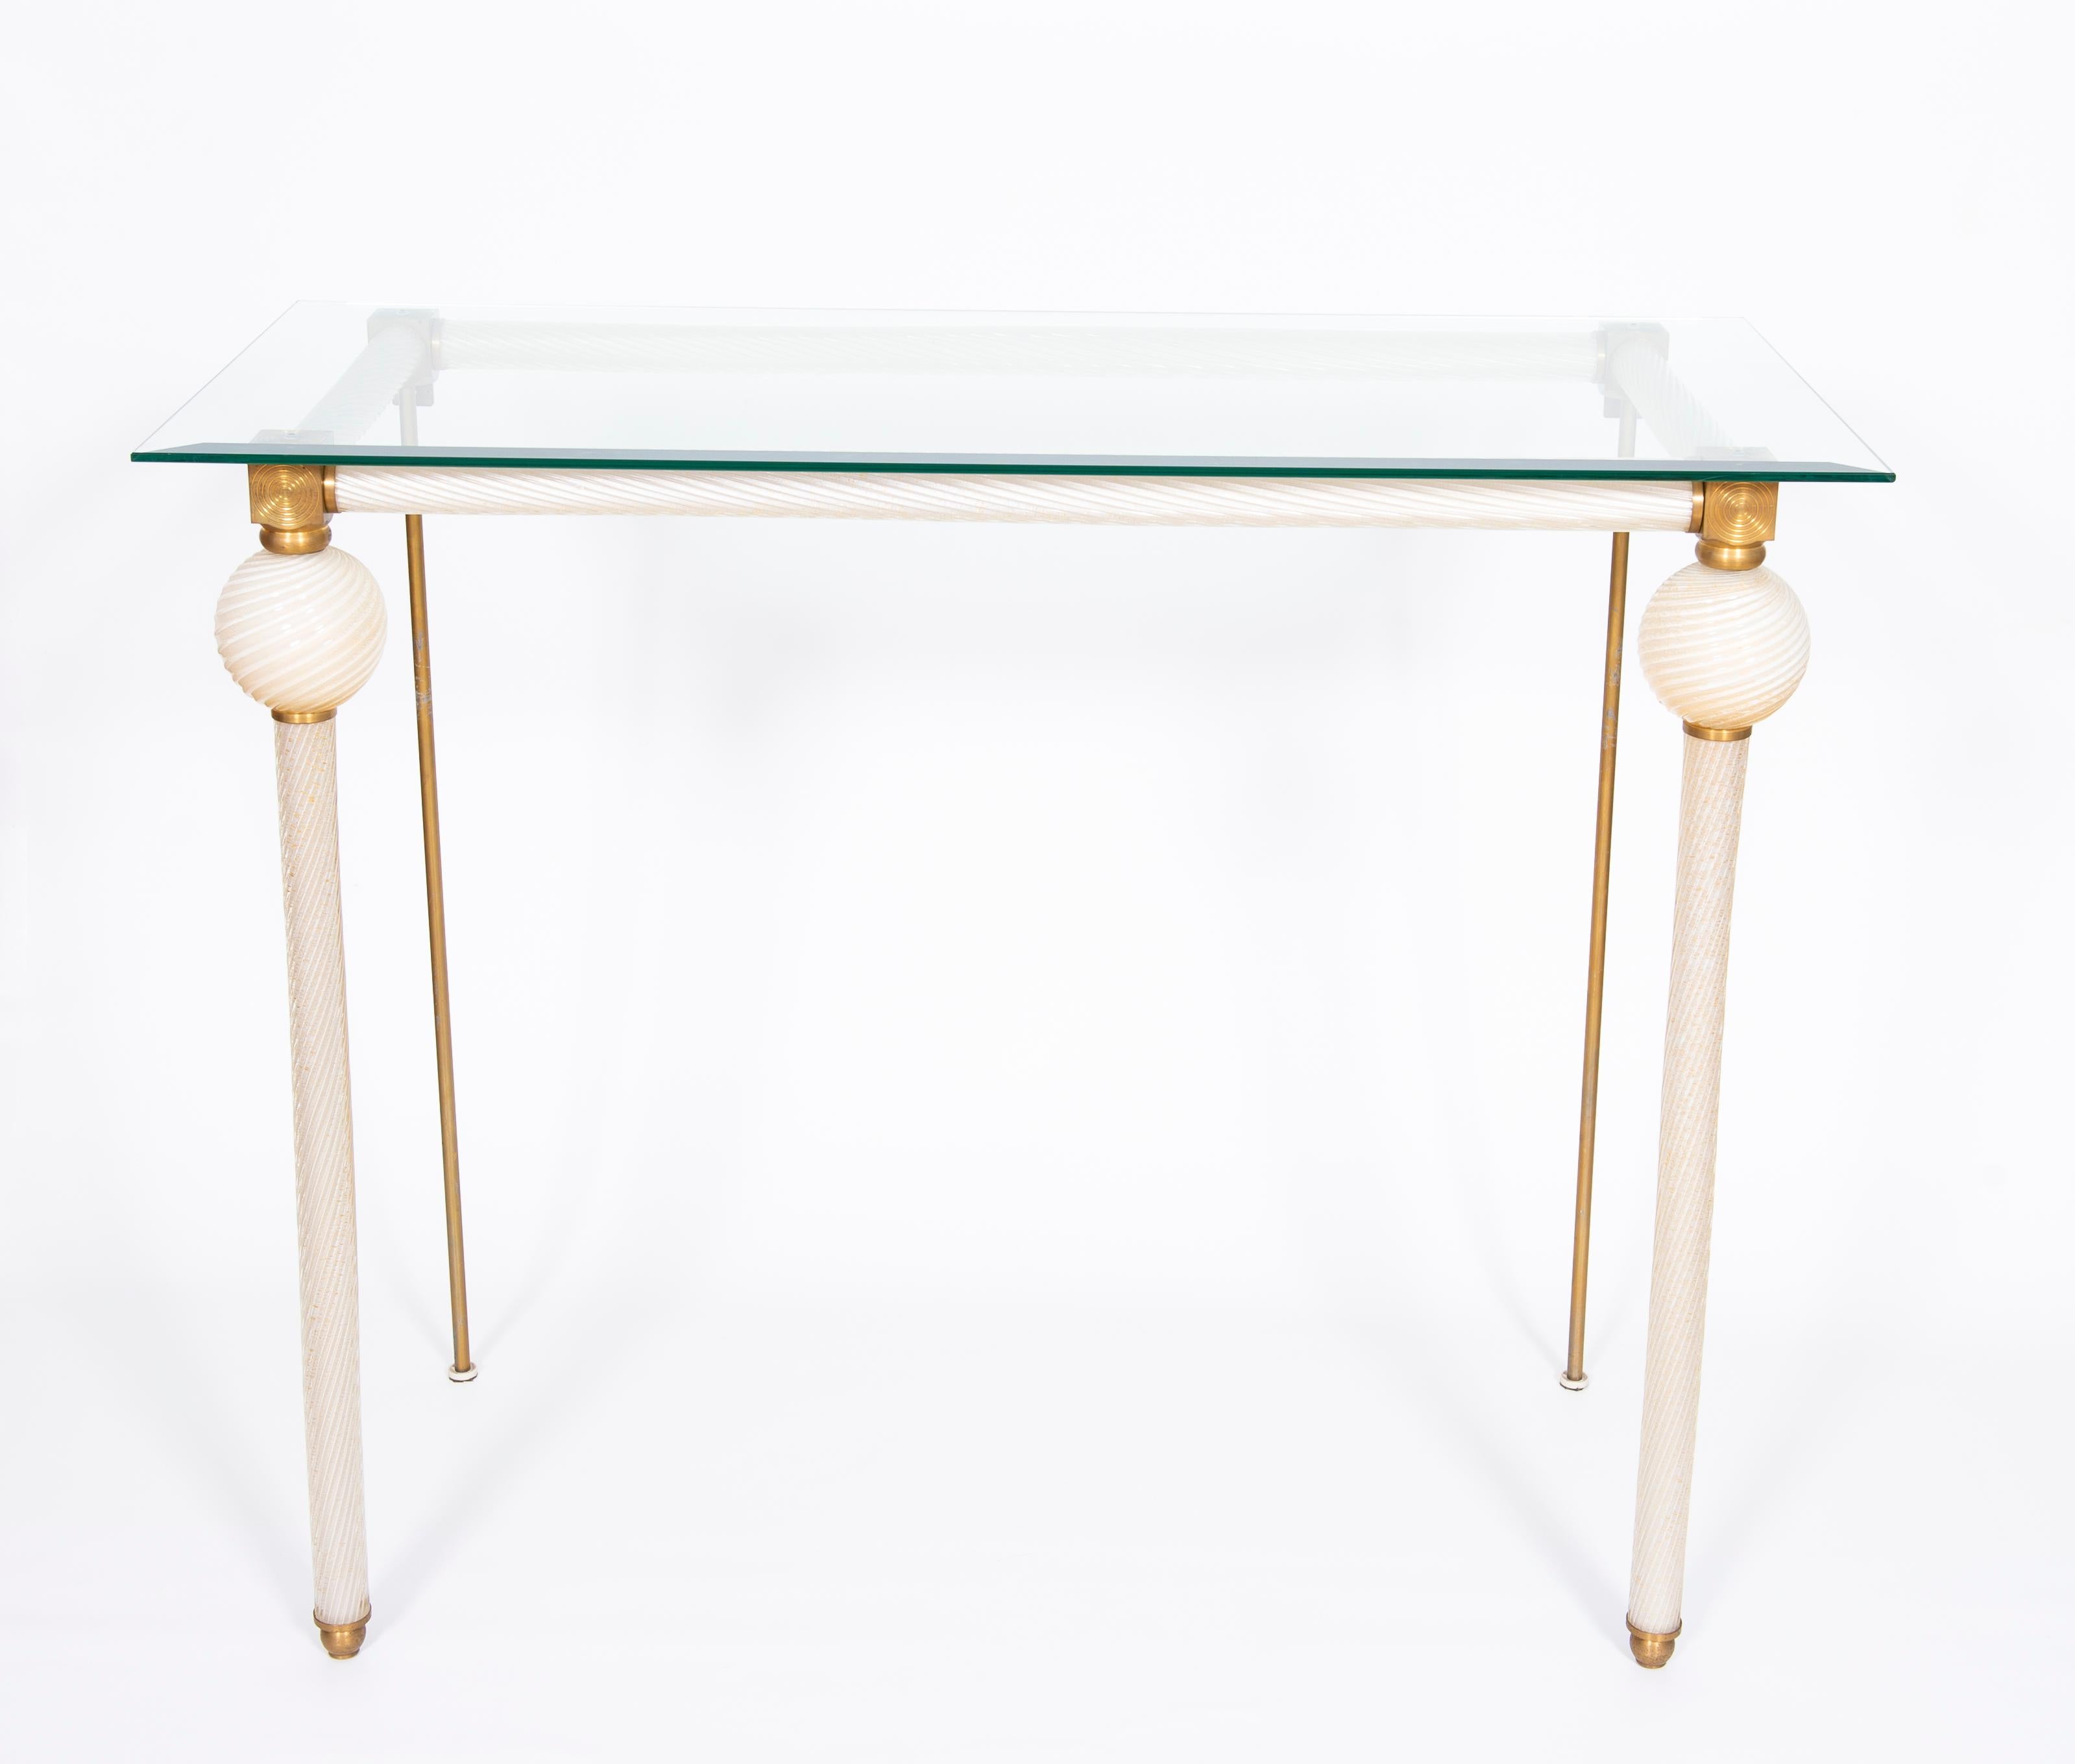 Console Table Milk color Murano Glass and Gold Touches 1980s Giovanni Dalla Fina.
This captivating Console Table is an exquisite example of Venetian craftsmanship, entirely handcrafted in blown Murano glass and handcrafted brass.
The Console Table